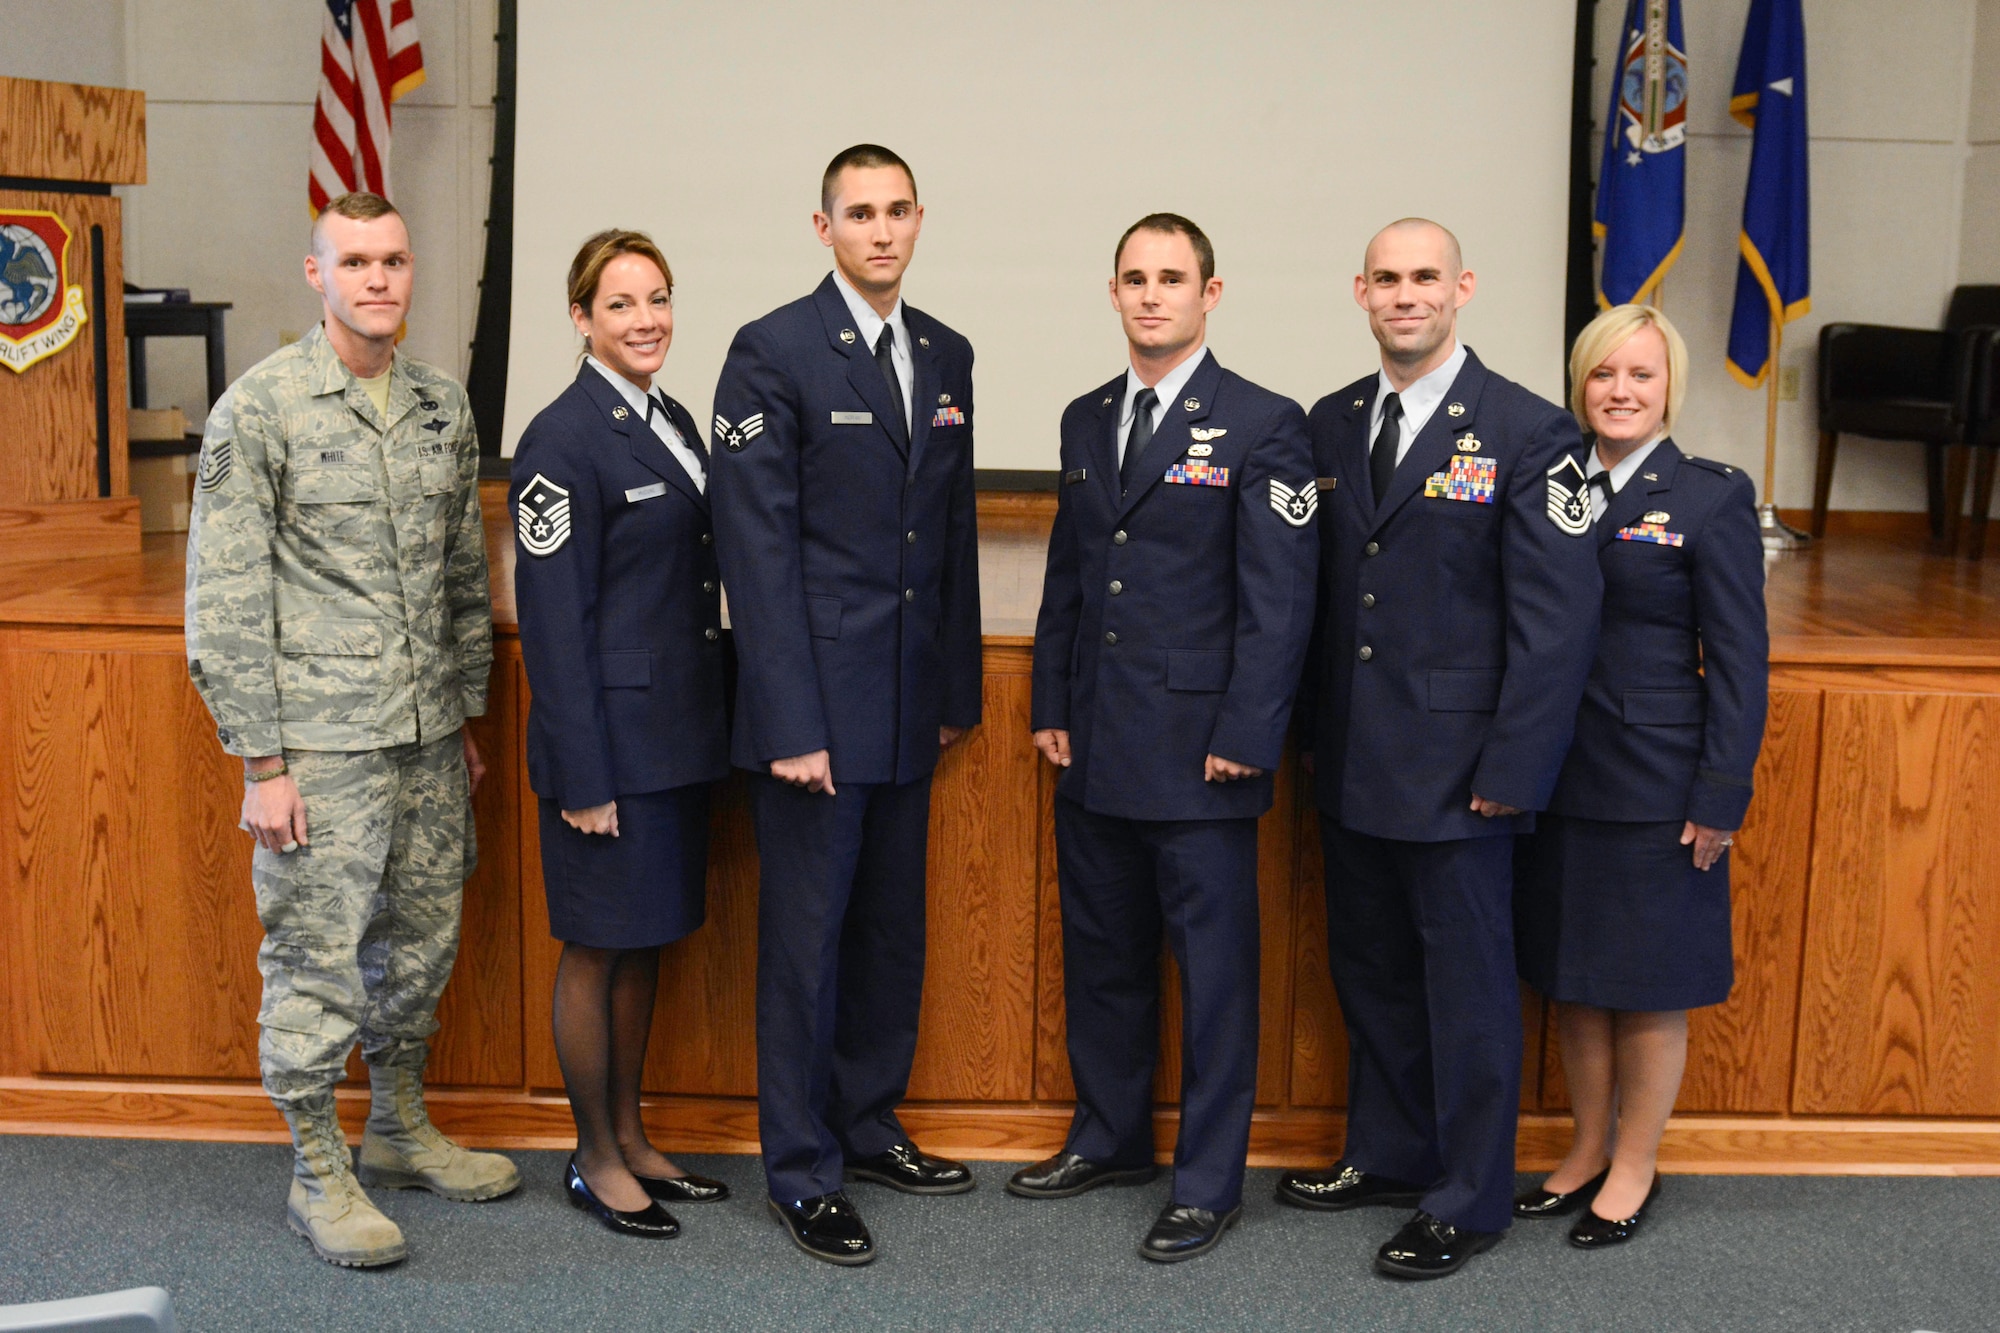 Airmen with the 139th Airlift Wing, Missouri Air National Guard, are recognized during an Airman of the Year ceremony at Rosecrans Air National Guard Base, Nov. 7, 2015.  (U.S. Air National Guard photo by Senior Airman Patrick P. Evenson/Released)